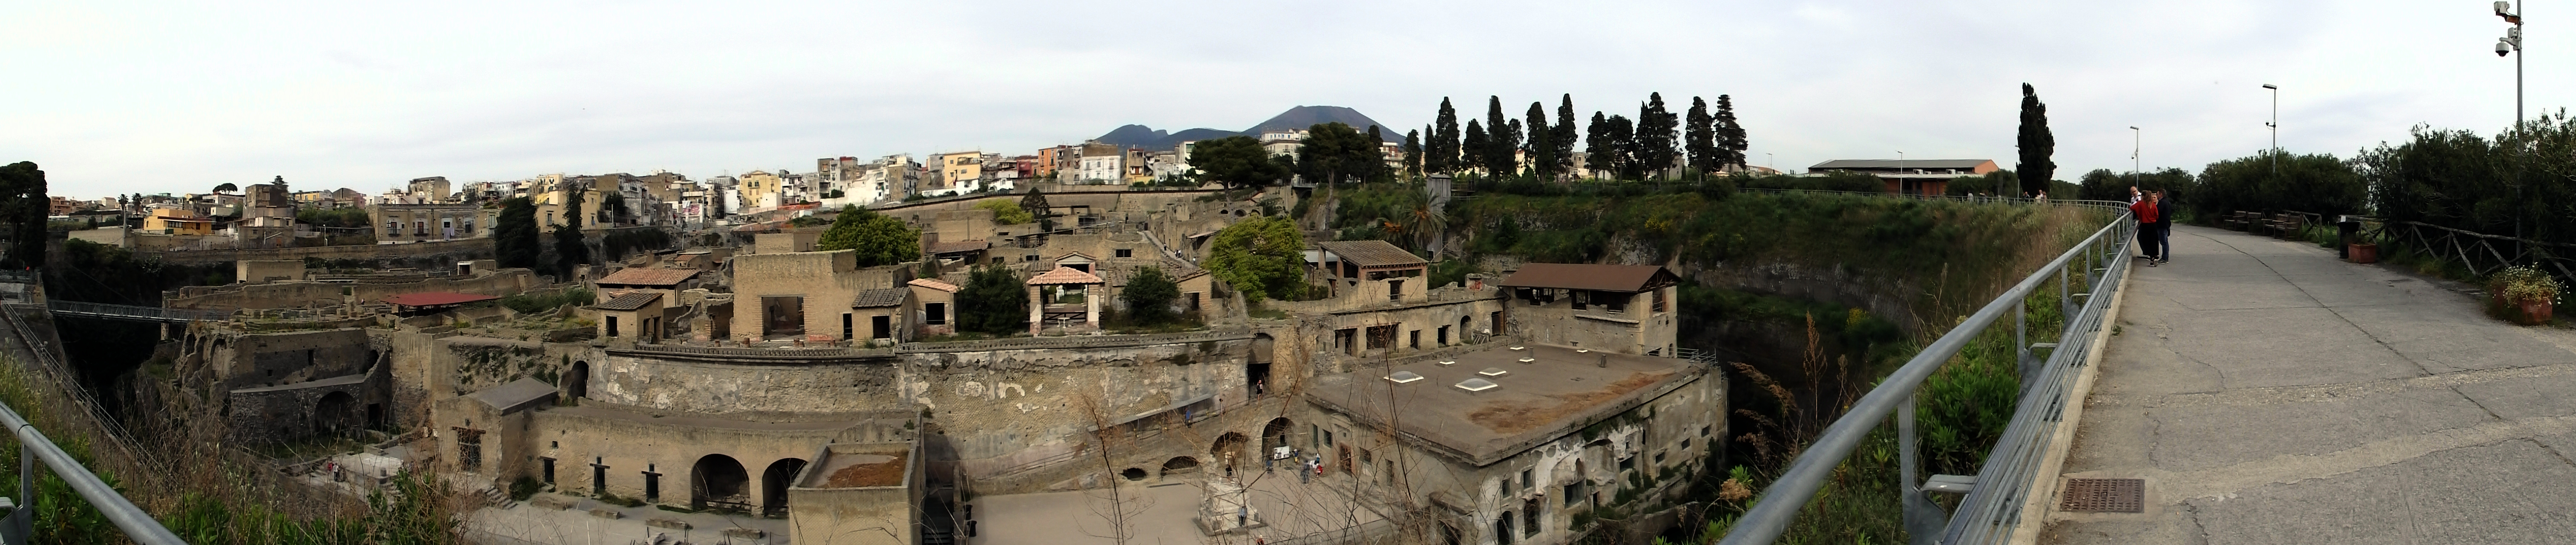 Herculaneum One of the towns destroyed by the eruption of Mt. Vesuvius AD 79.